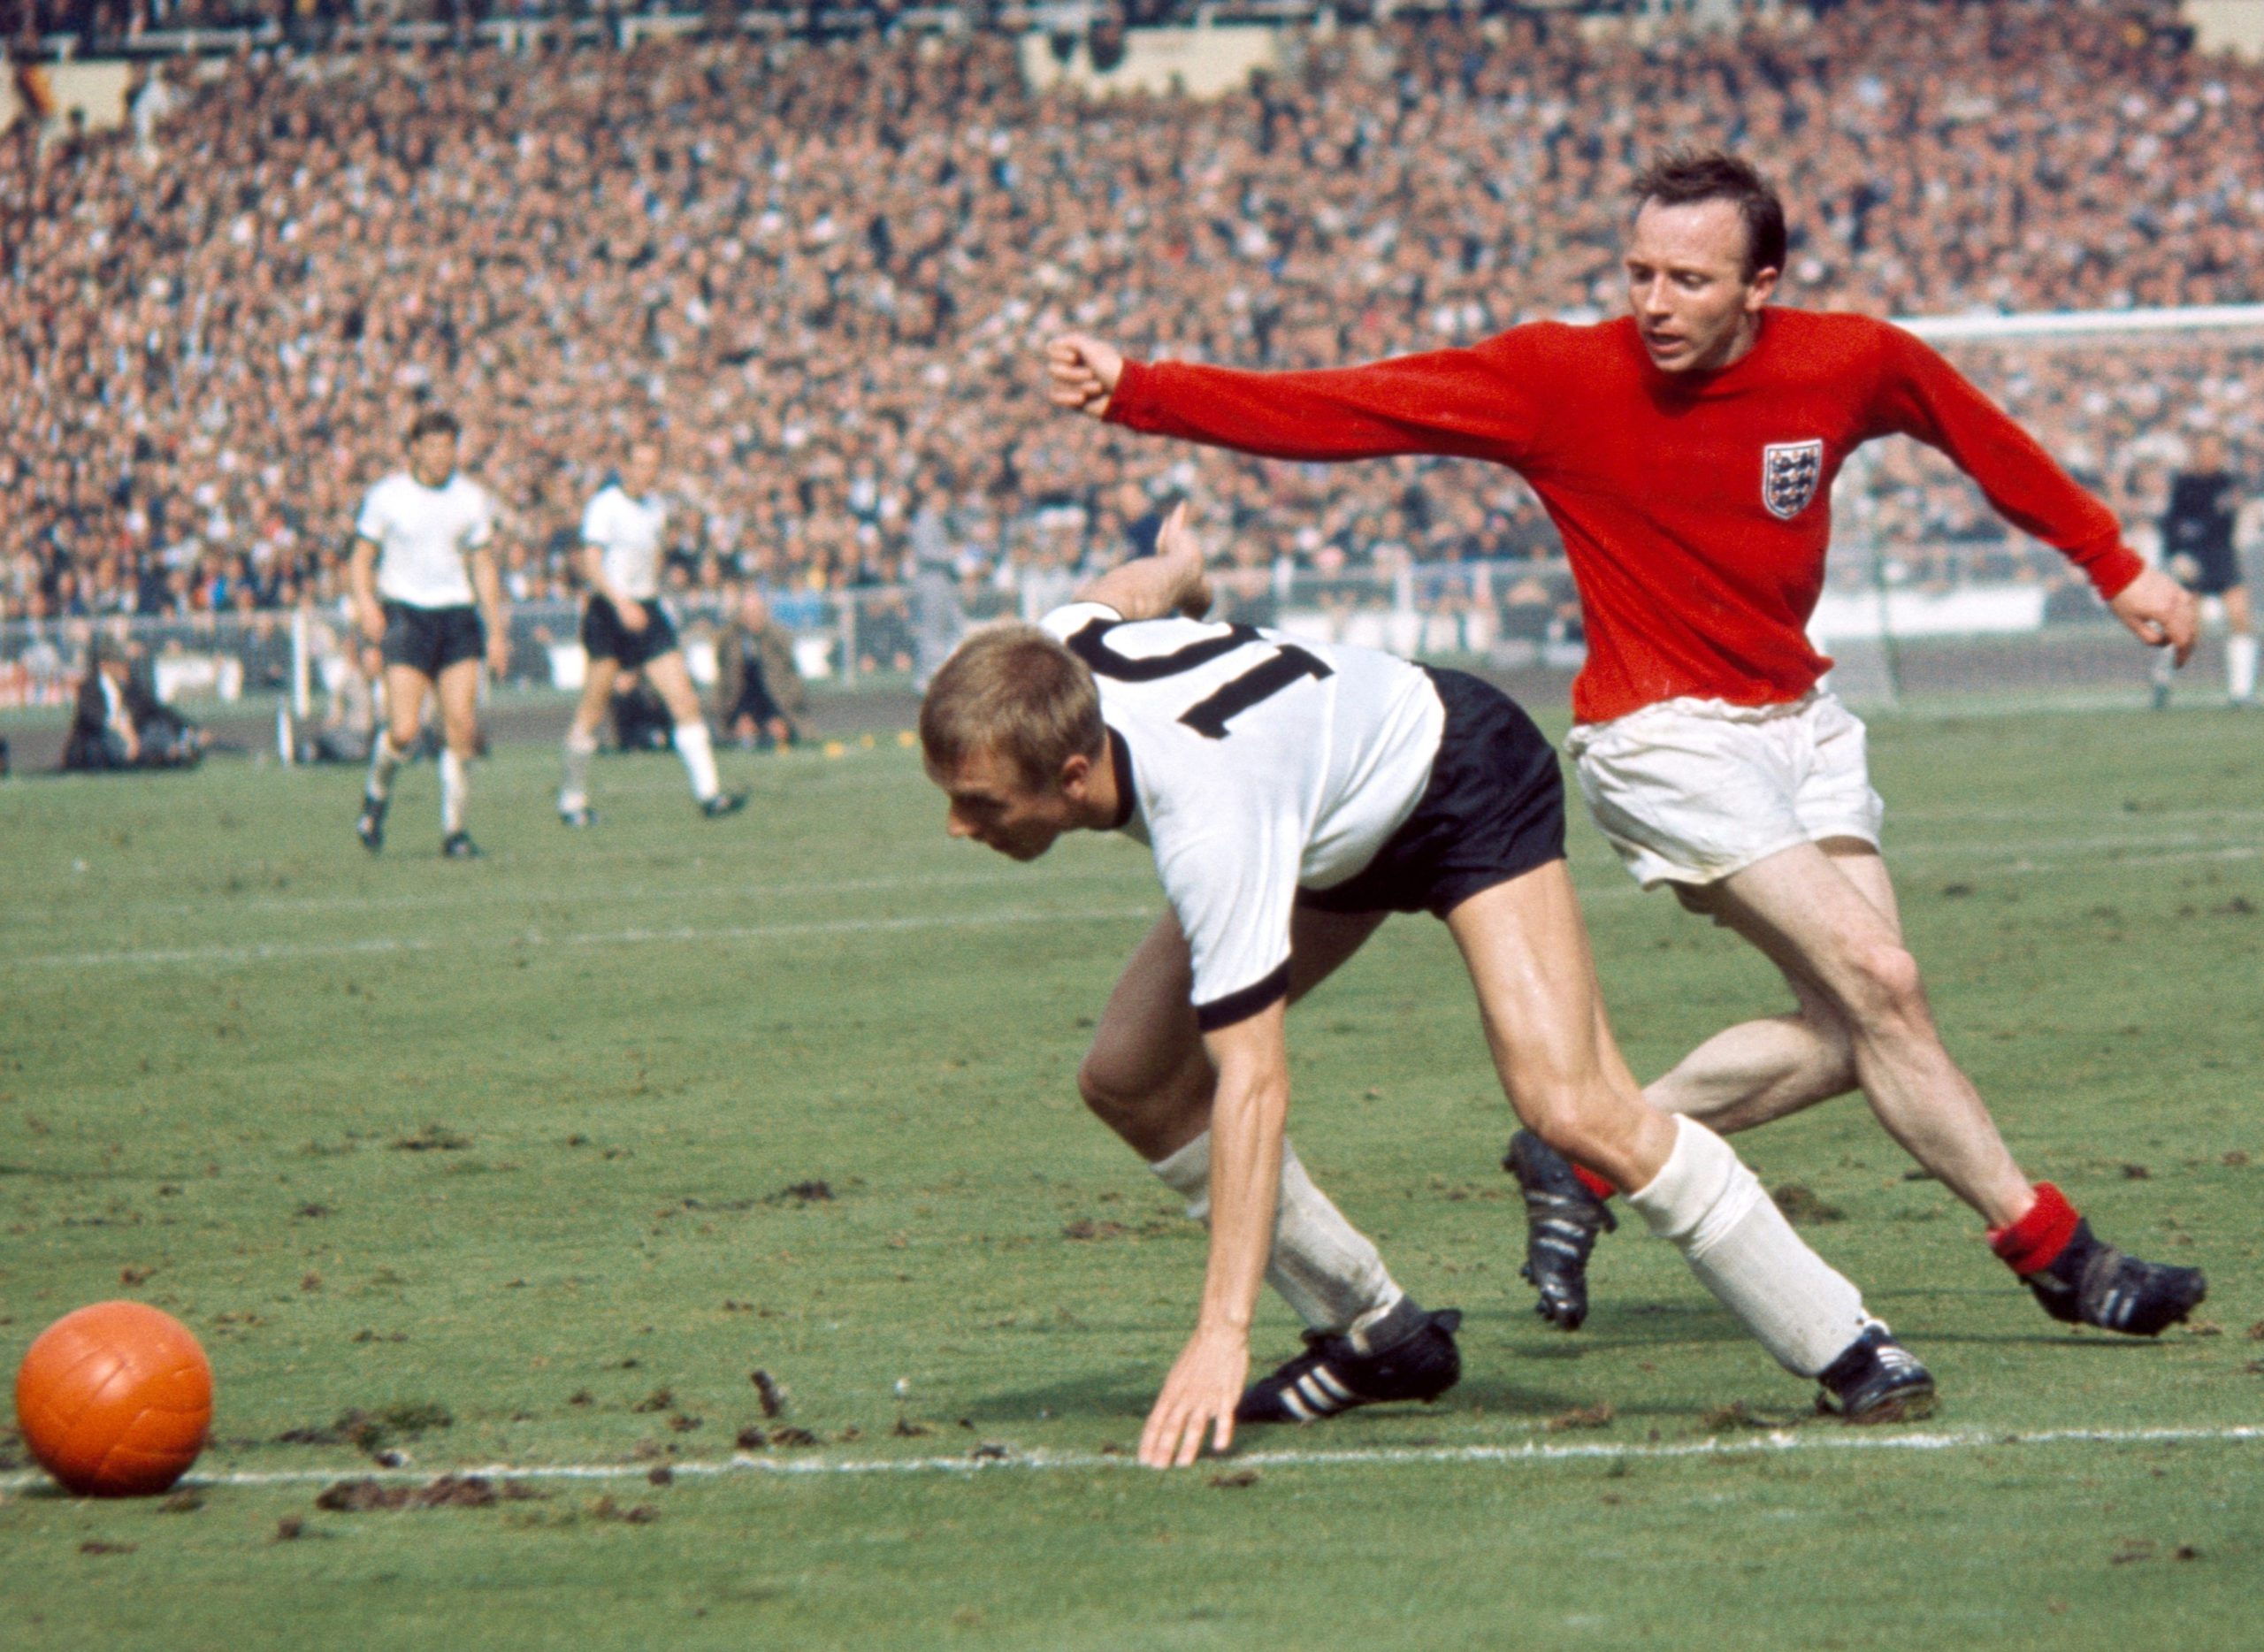 Nobby Stiles, one of the tough soccer guys from before